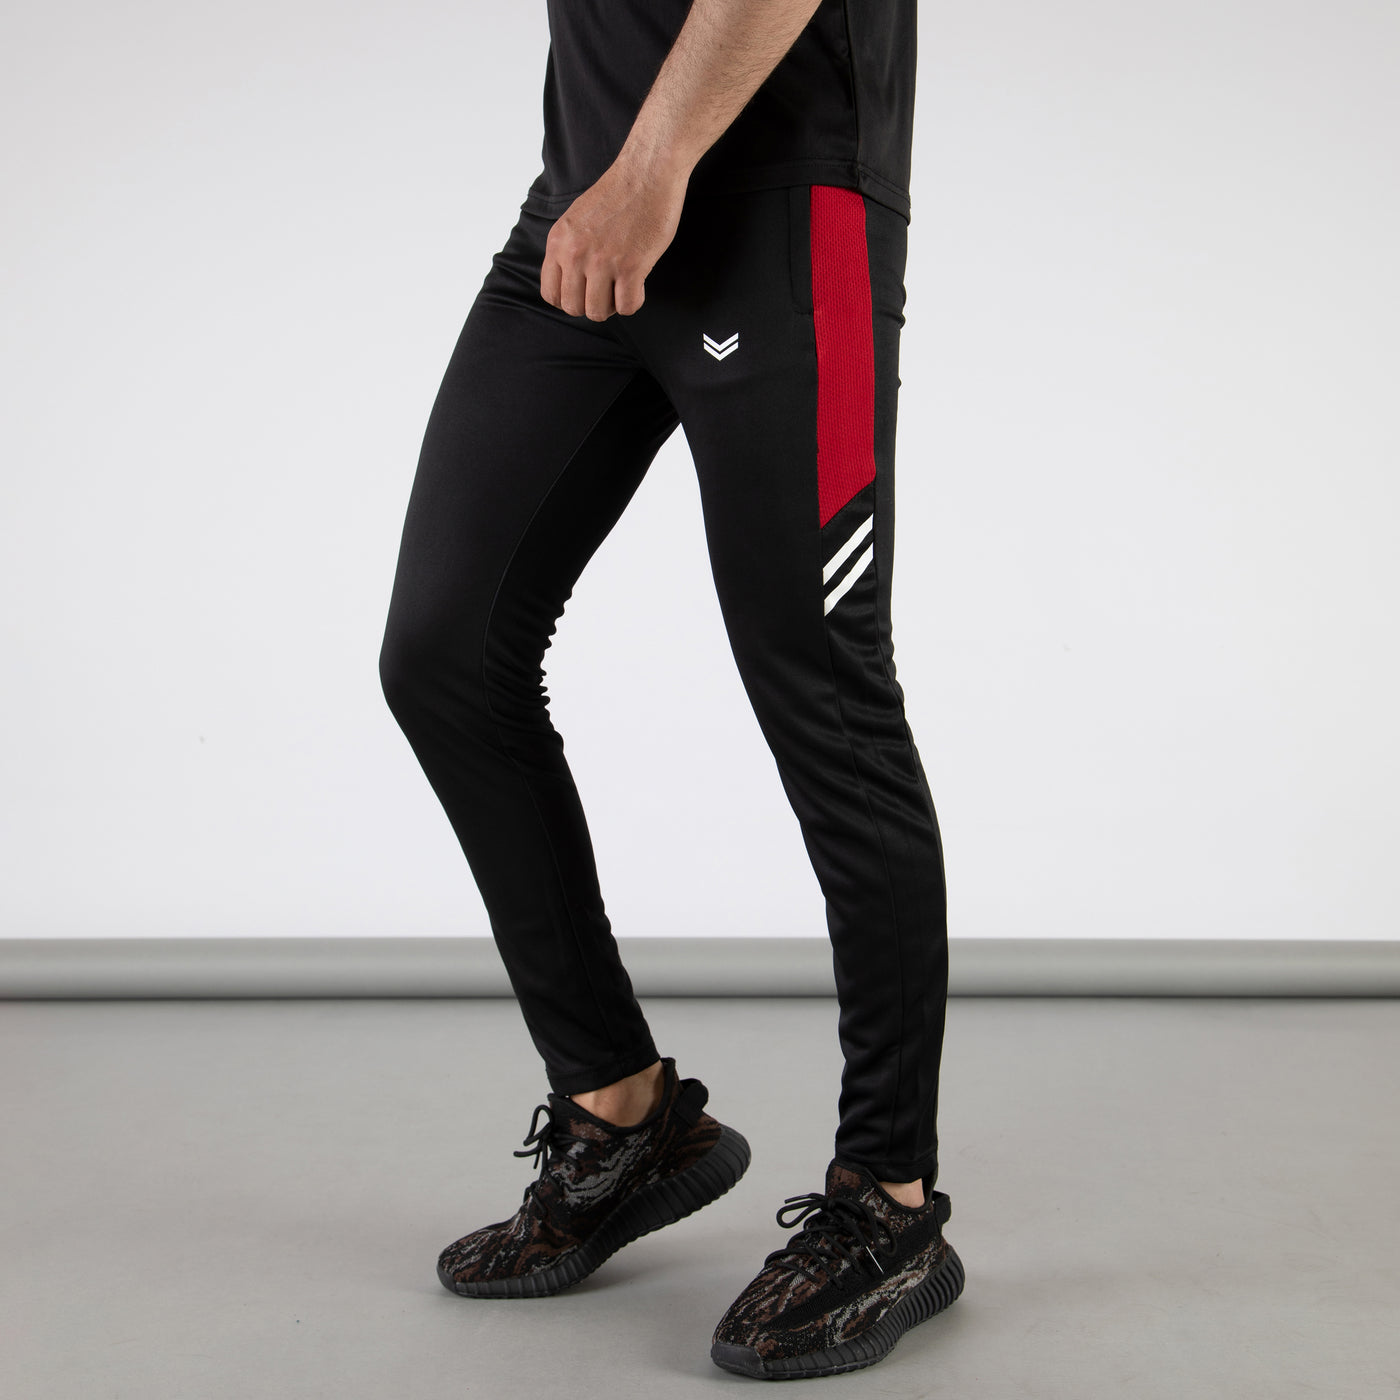 Black Quick Dry Hybrid Bottoms with Short Red Mesh Panels & Two Stripes